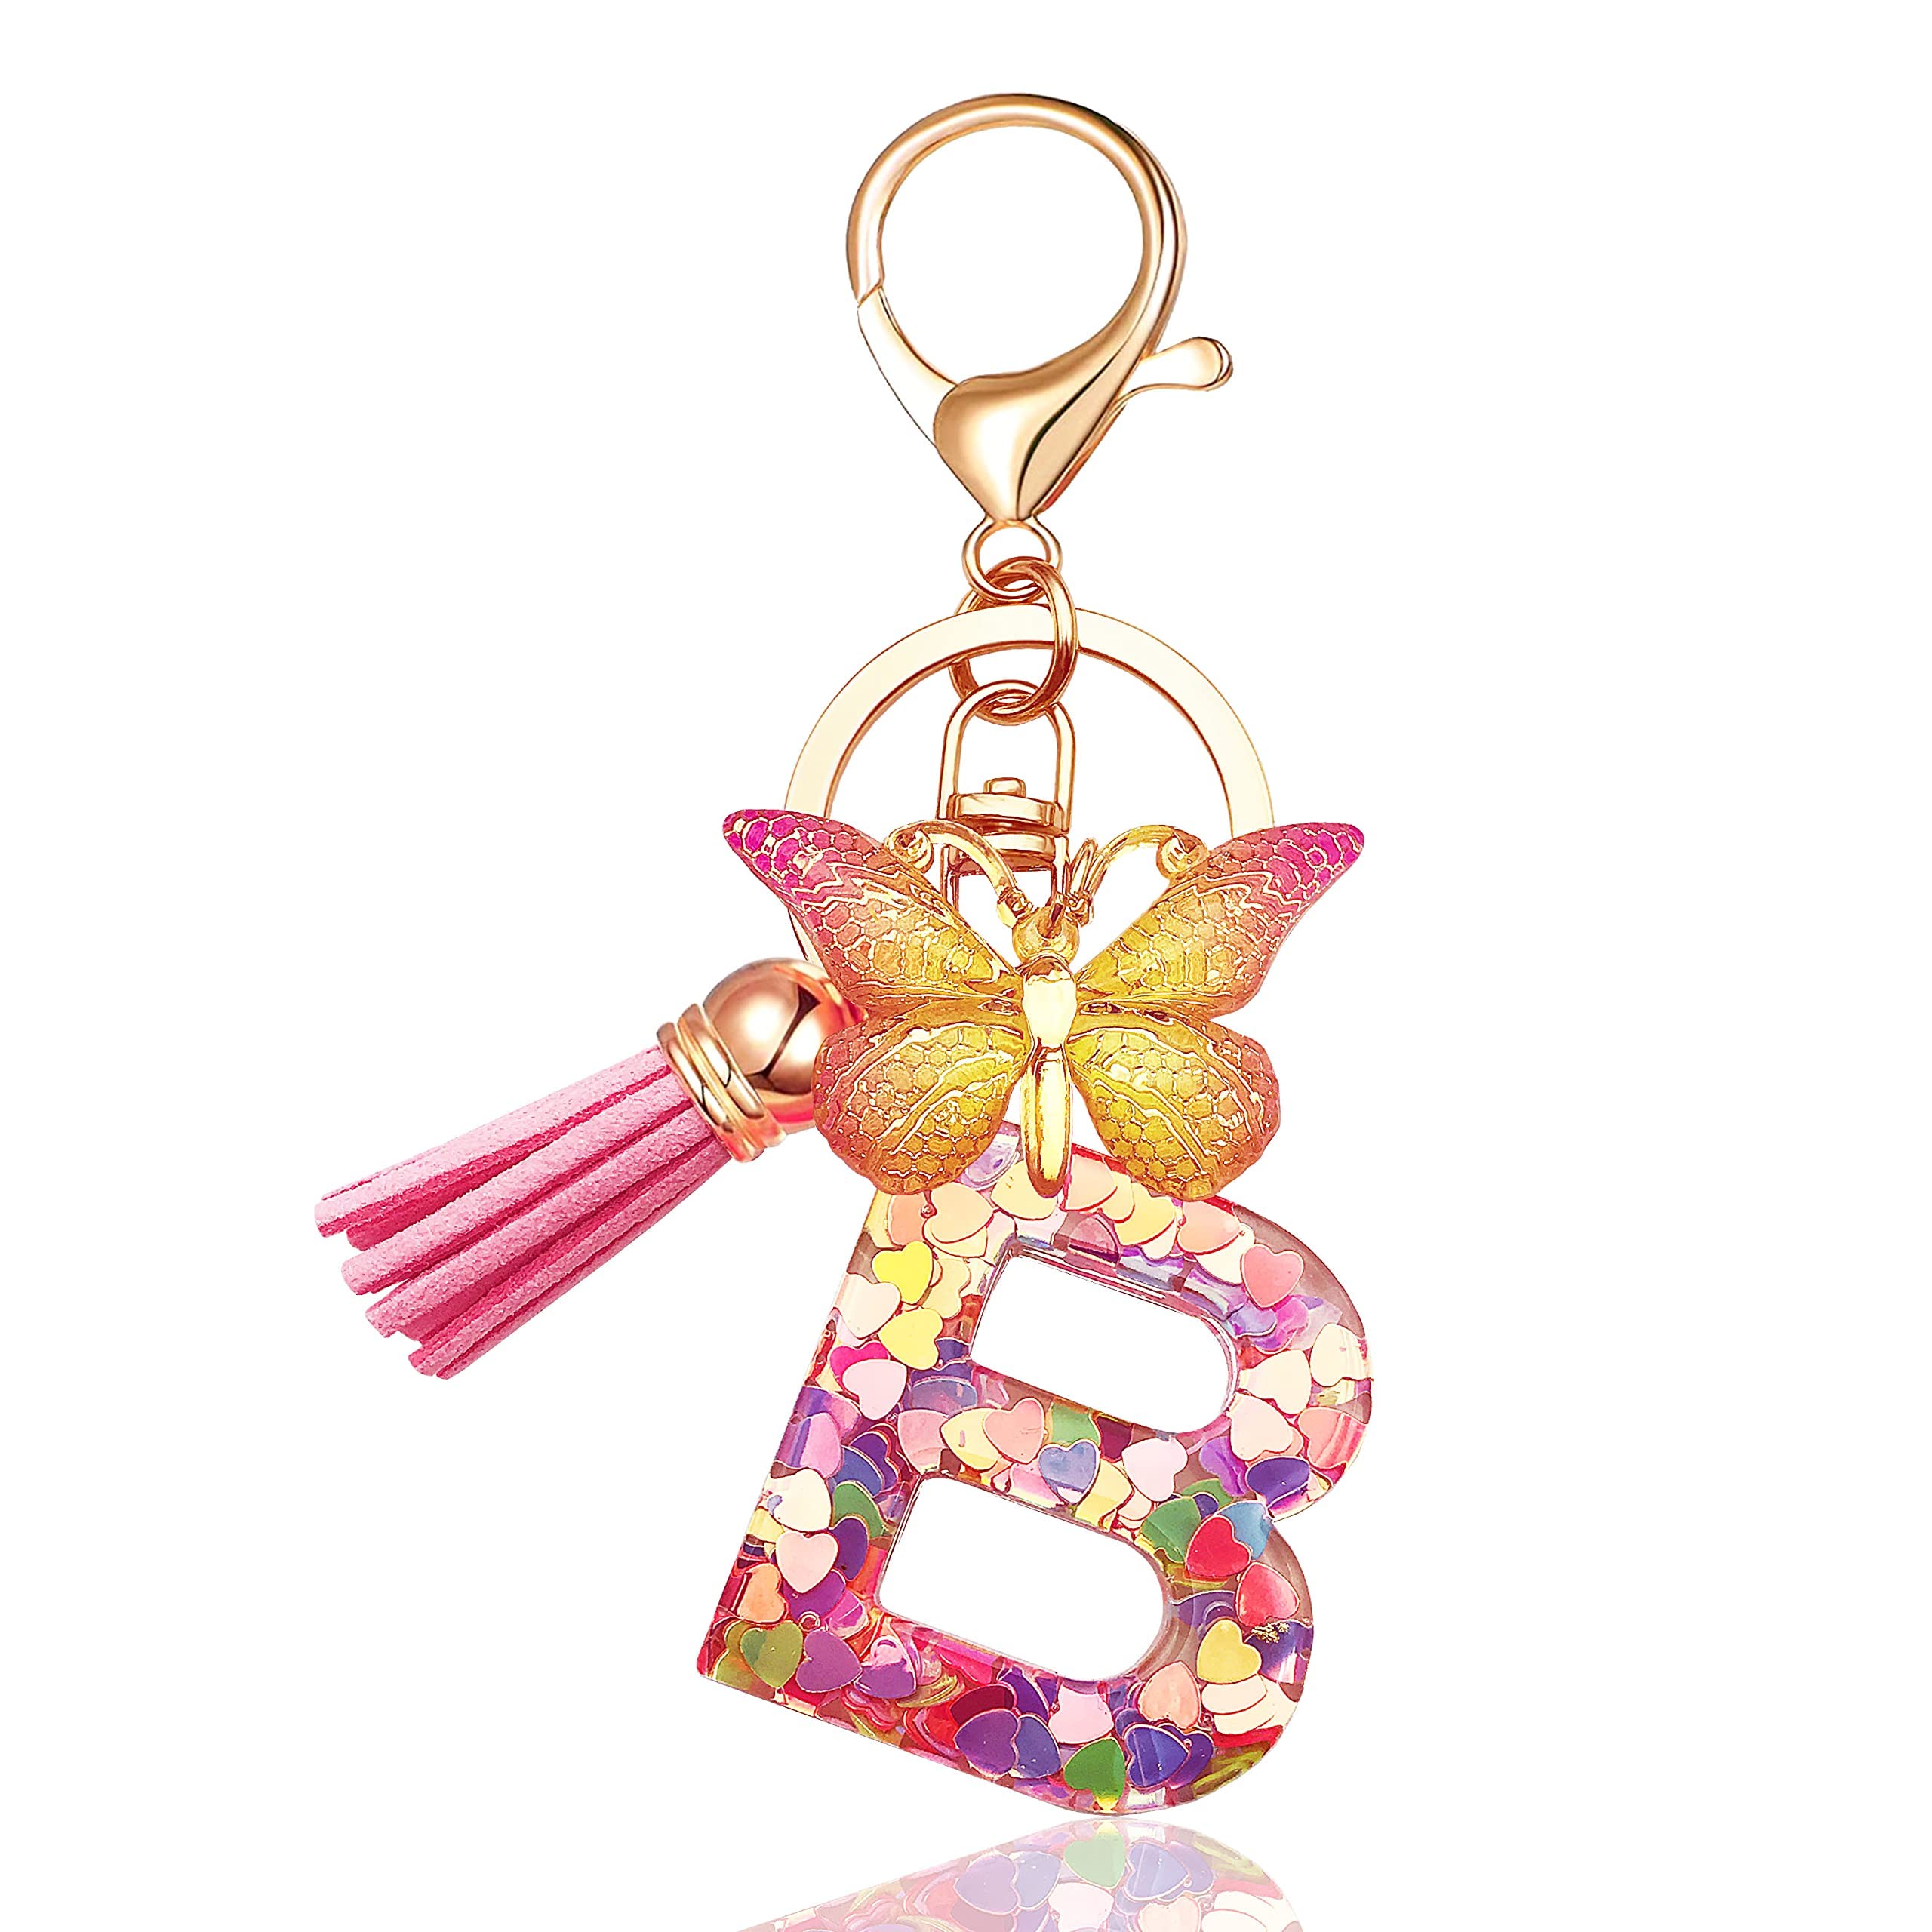 38 X ENIGMADROPS KEYCHAINS IN THE SHAPE OF INITIAL LETTERS FOR WOMEN TASSEL BUTTERFLY PINK PURPLE CUTE CAR KEYRING FOR WALLET PURSES BACKPACK - TOTAL RRP £190: LOCATION - D RACK